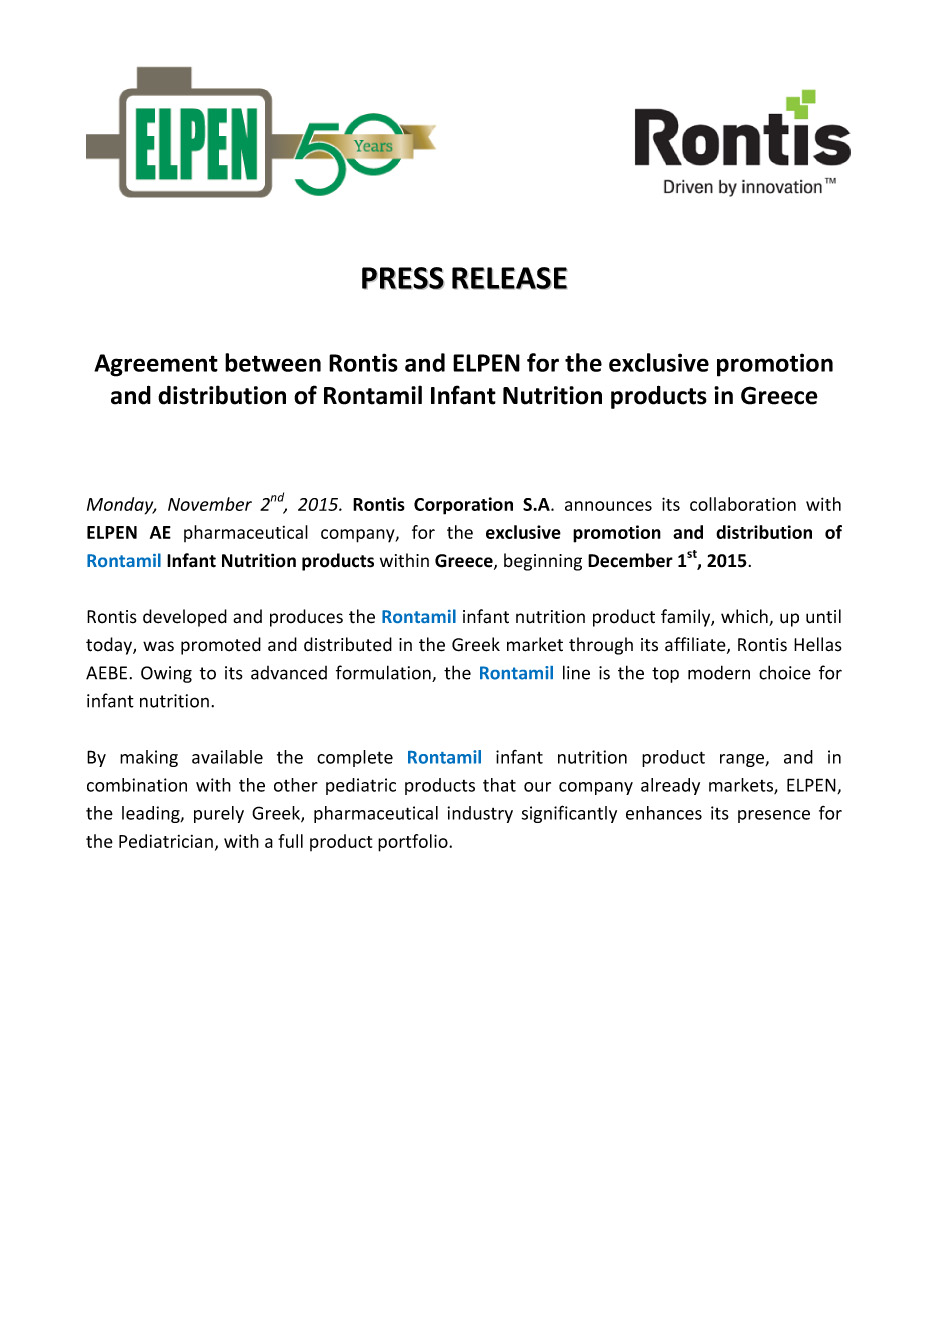 Agreement between Rontis and ELPEN for the exclusive promotion and distribution of Rontamil Infant Nutrition products in Greece